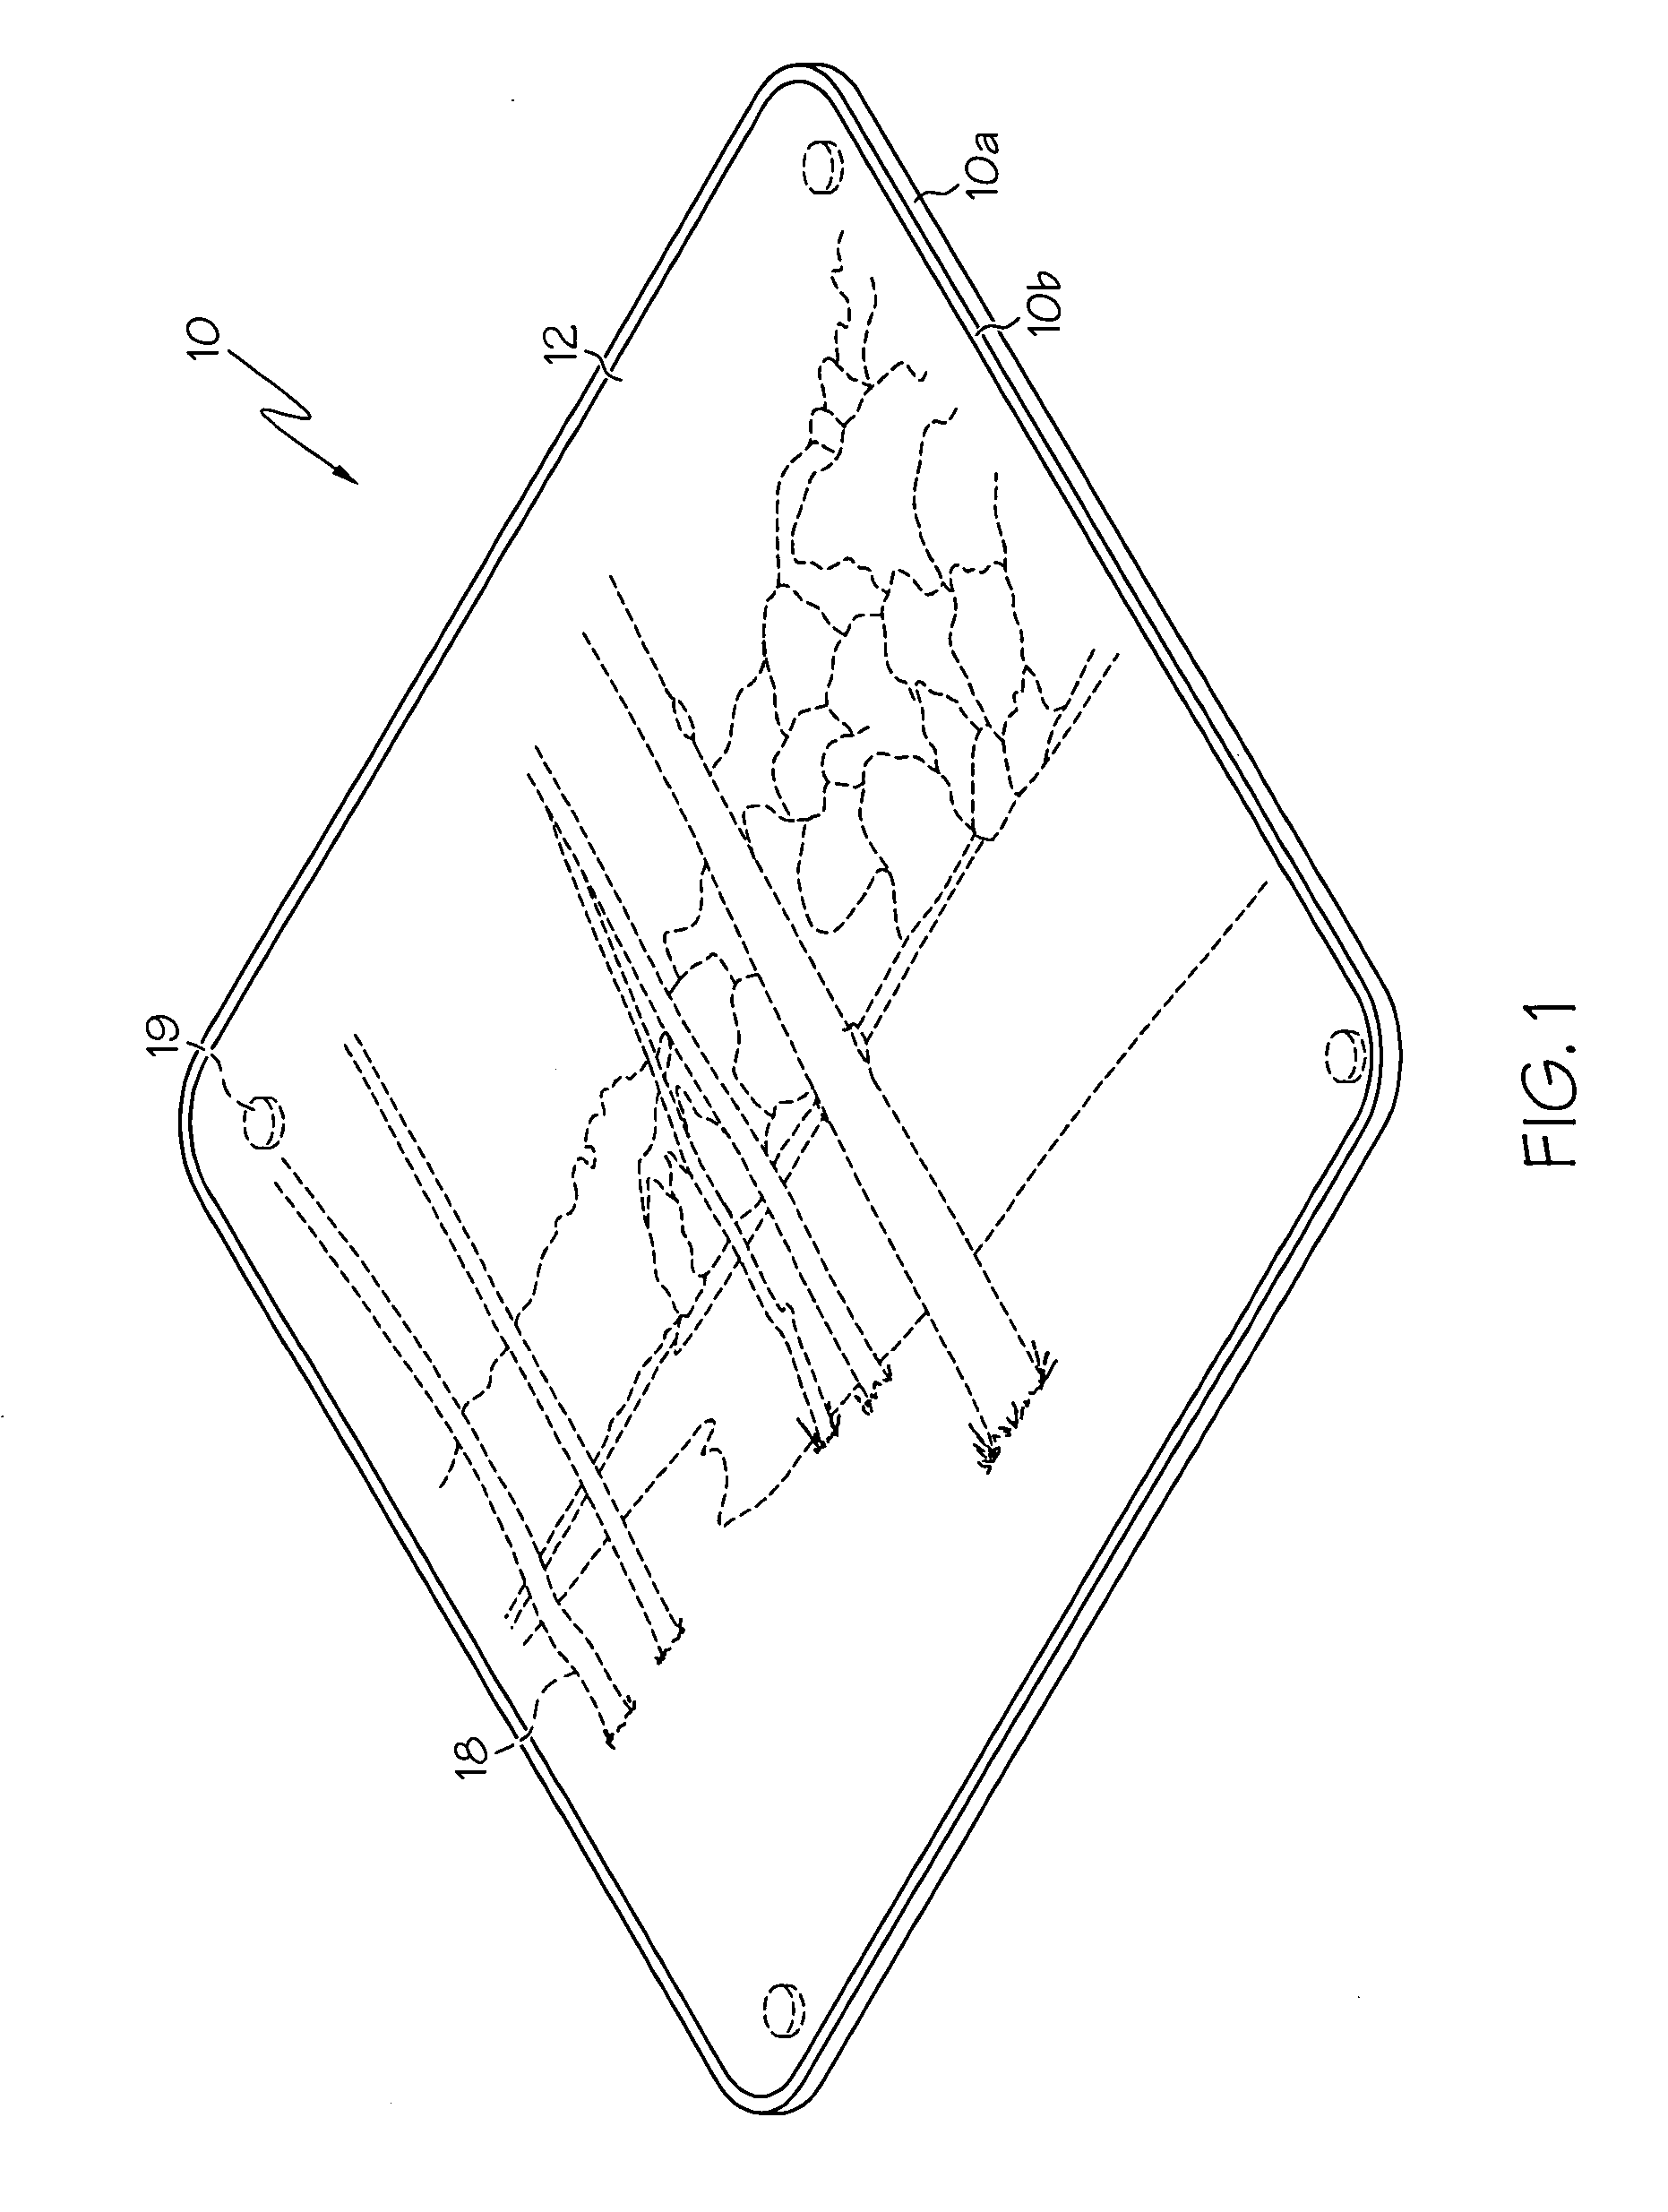 Graphic mat and method of producing the same